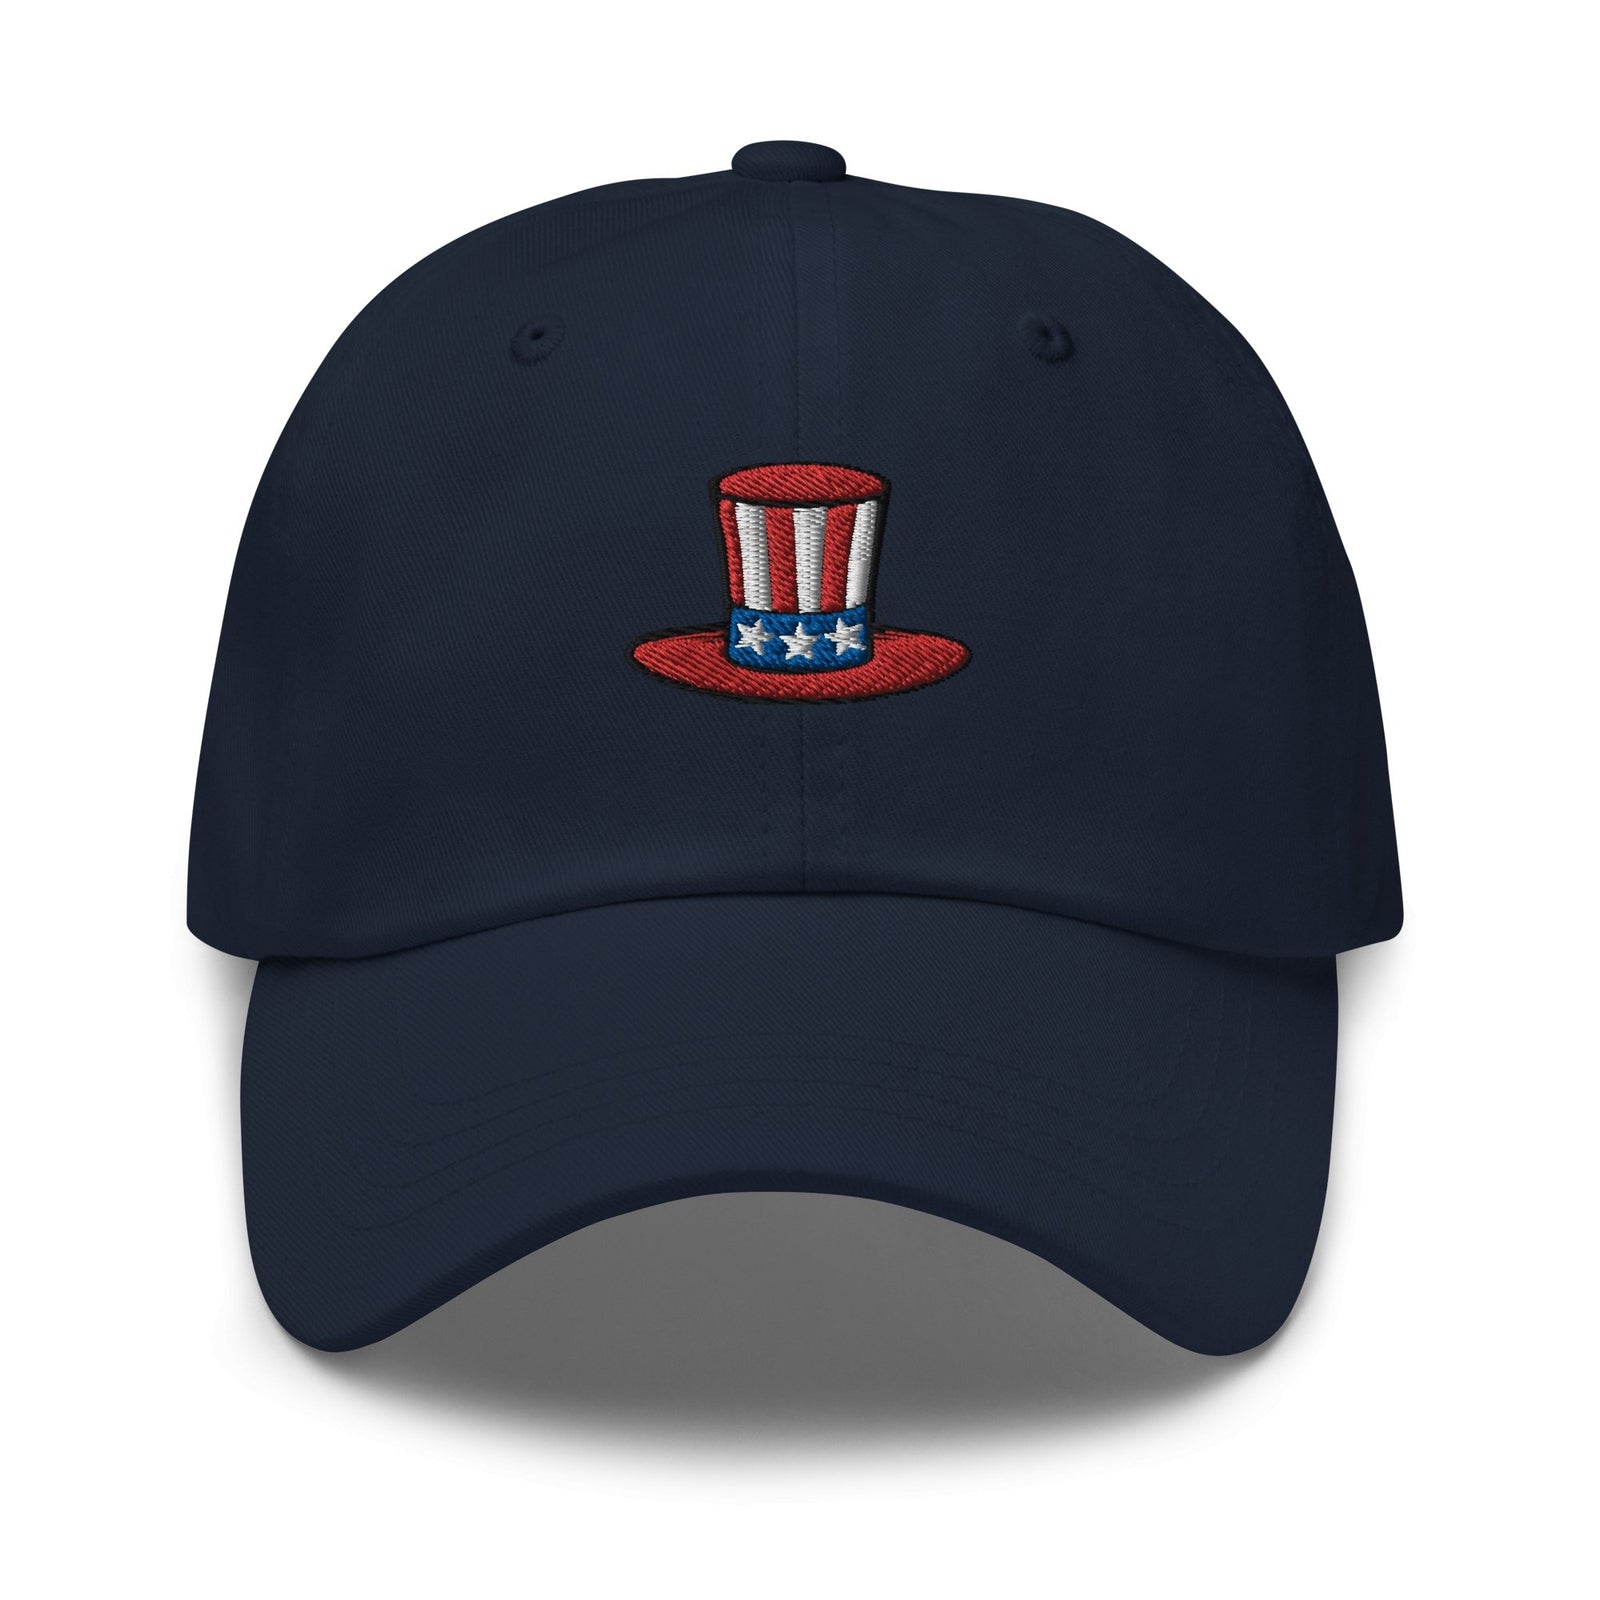 //cdn.shopify.com/s/files/1/0274/2488/2766/products/uncle-sam-hat-dad-hat-400917_5000x.jpg?v=1652422638 5000w,
    //cdn.shopify.com/s/files/1/0274/2488/2766/products/uncle-sam-hat-dad-hat-400917_4500x.jpg?v=1652422638 4500w,
    //cdn.shopify.com/s/files/1/0274/2488/2766/products/uncle-sam-hat-dad-hat-400917_4000x.jpg?v=1652422638 4000w,
    //cdn.shopify.com/s/files/1/0274/2488/2766/products/uncle-sam-hat-dad-hat-400917_3500x.jpg?v=1652422638 3500w,
    //cdn.shopify.com/s/files/1/0274/2488/2766/products/uncle-sam-hat-dad-hat-400917_3000x.jpg?v=1652422638 3000w,
    //cdn.shopify.com/s/files/1/0274/2488/2766/products/uncle-sam-hat-dad-hat-400917_2500x.jpg?v=1652422638 2500w,
    //cdn.shopify.com/s/files/1/0274/2488/2766/products/uncle-sam-hat-dad-hat-400917_2000x.jpg?v=1652422638 2000w,
    //cdn.shopify.com/s/files/1/0274/2488/2766/products/uncle-sam-hat-dad-hat-400917_1800x.jpg?v=1652422638 1800w,
    //cdn.shopify.com/s/files/1/0274/2488/2766/products/uncle-sam-hat-dad-hat-400917_1600x.jpg?v=1652422638 1600w,
    //cdn.shopify.com/s/files/1/0274/2488/2766/products/uncle-sam-hat-dad-hat-400917_1400x.jpg?v=1652422638 1400w,
    //cdn.shopify.com/s/files/1/0274/2488/2766/products/uncle-sam-hat-dad-hat-400917_1200x.jpg?v=1652422638 1200w,
    //cdn.shopify.com/s/files/1/0274/2488/2766/products/uncle-sam-hat-dad-hat-400917_1000x.jpg?v=1652422638 1000w,
    //cdn.shopify.com/s/files/1/0274/2488/2766/products/uncle-sam-hat-dad-hat-400917_800x.jpg?v=1652422638 800w,
    //cdn.shopify.com/s/files/1/0274/2488/2766/products/uncle-sam-hat-dad-hat-400917_600x.jpg?v=1652422638 600w,
    //cdn.shopify.com/s/files/1/0274/2488/2766/products/uncle-sam-hat-dad-hat-400917_400x.jpg?v=1652422638 400w,
    //cdn.shopify.com/s/files/1/0274/2488/2766/products/uncle-sam-hat-dad-hat-400917_200x.jpg?v=1652422638 200w